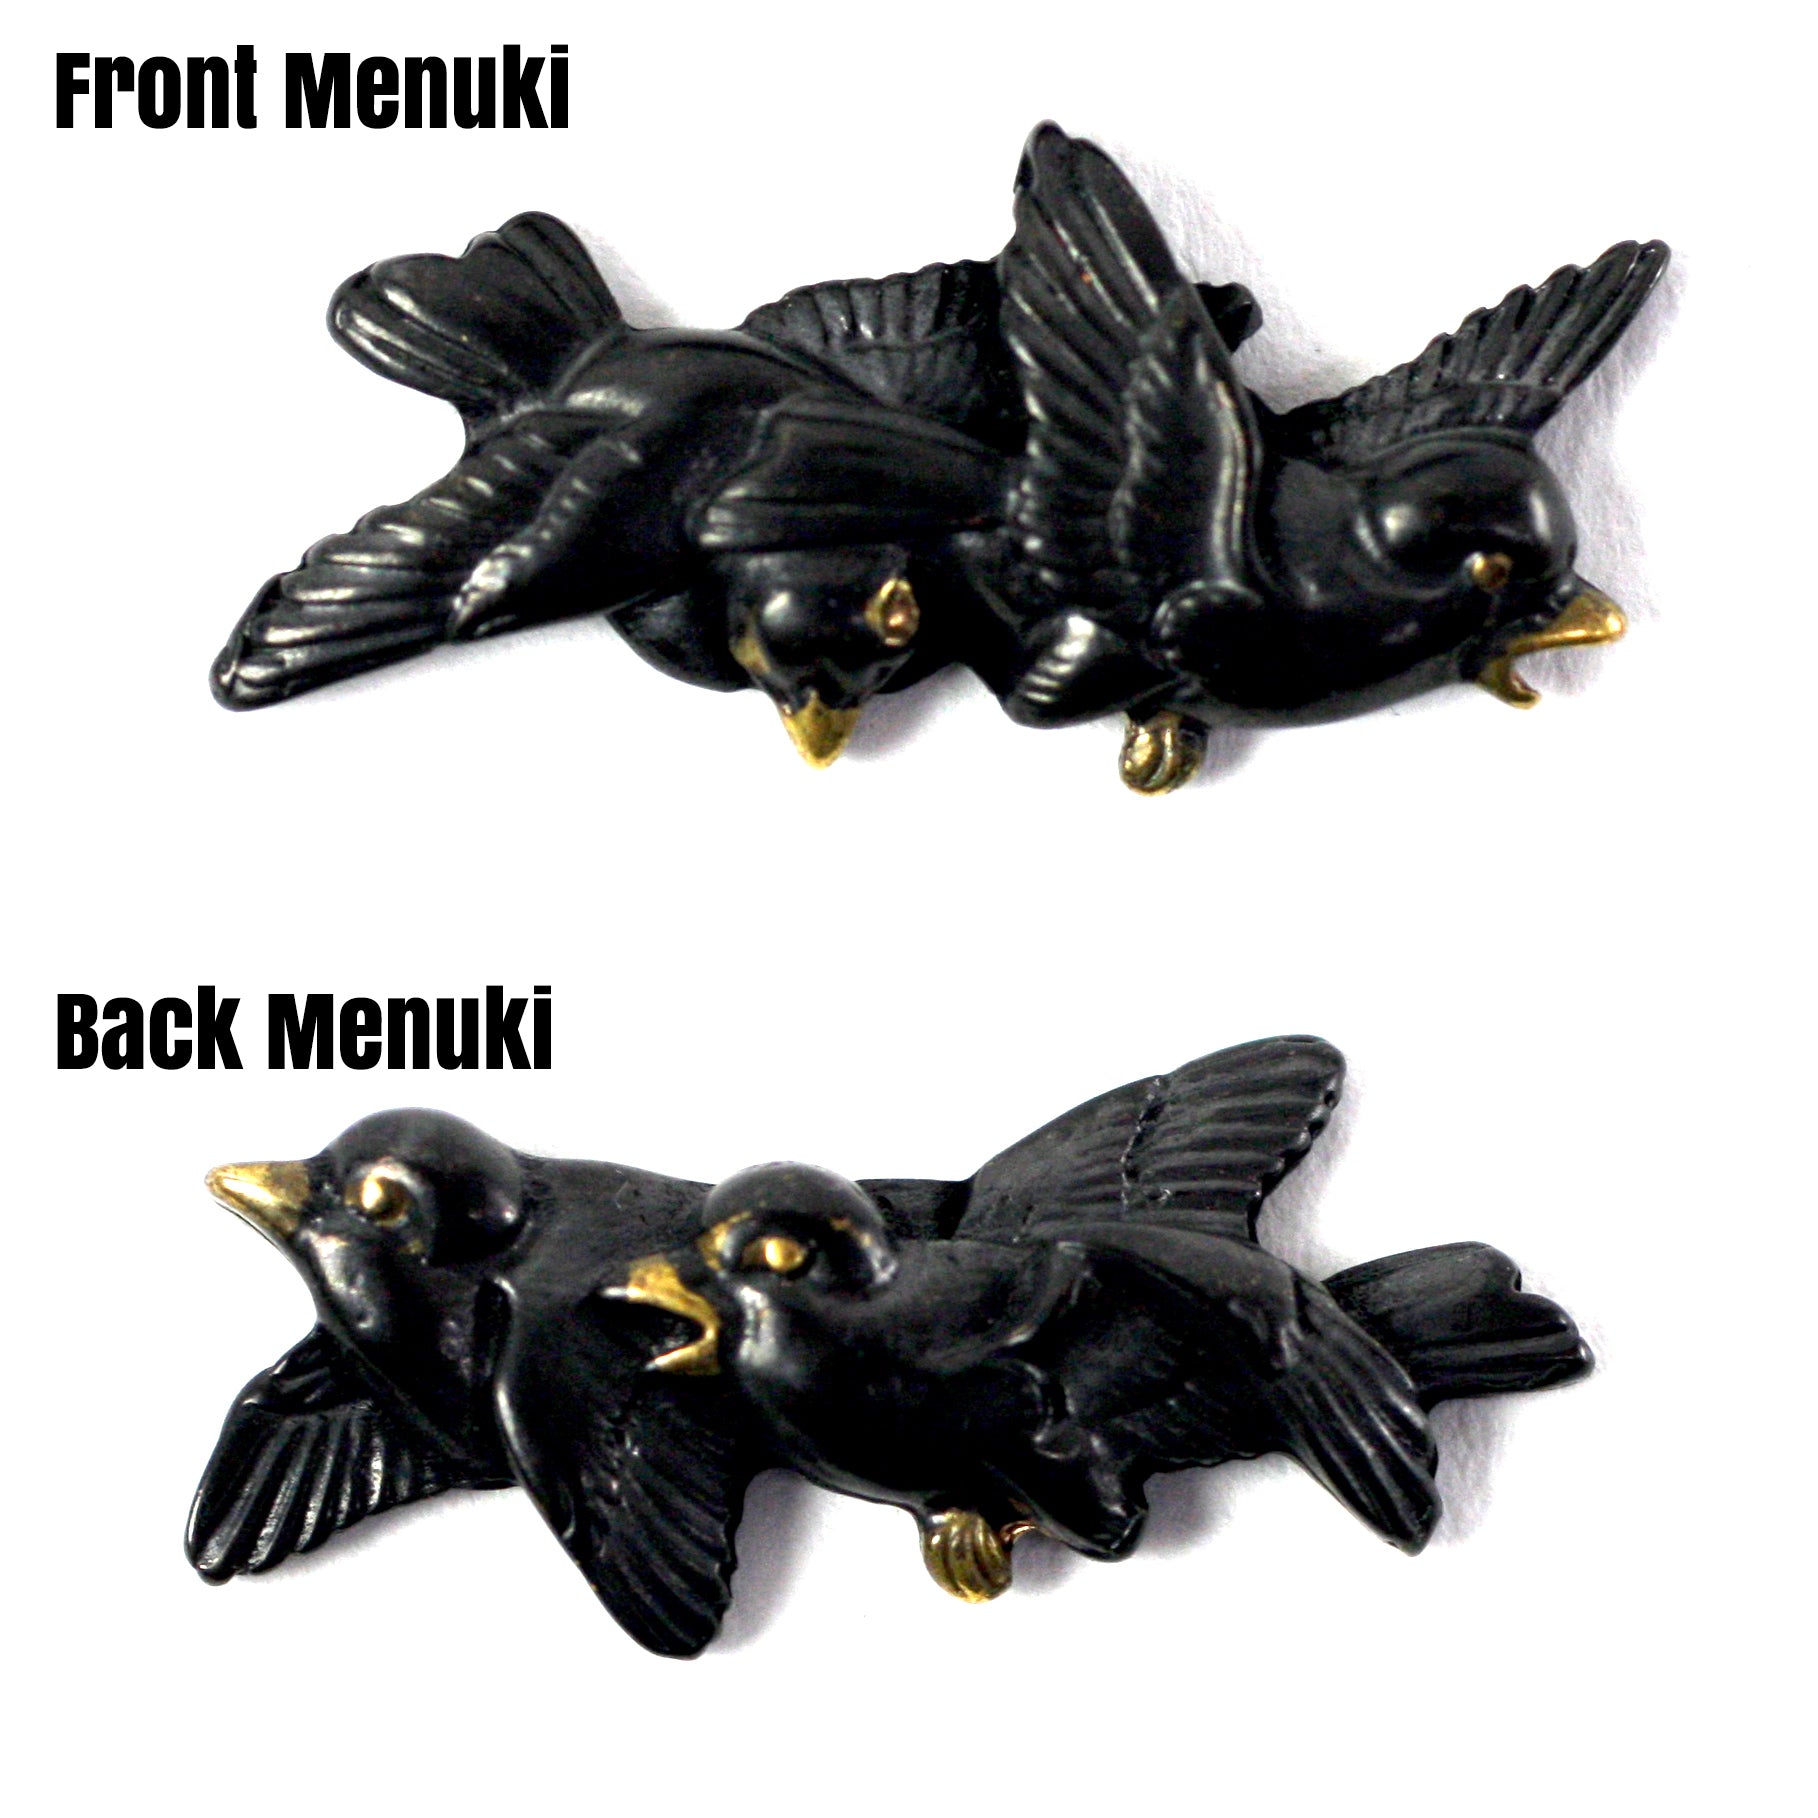 This is a pair of meoto-dori menuki. The one on top is the "omote menuki" (front side menuki) and the one on the bottom is the "ura menuki" (back side menuki)